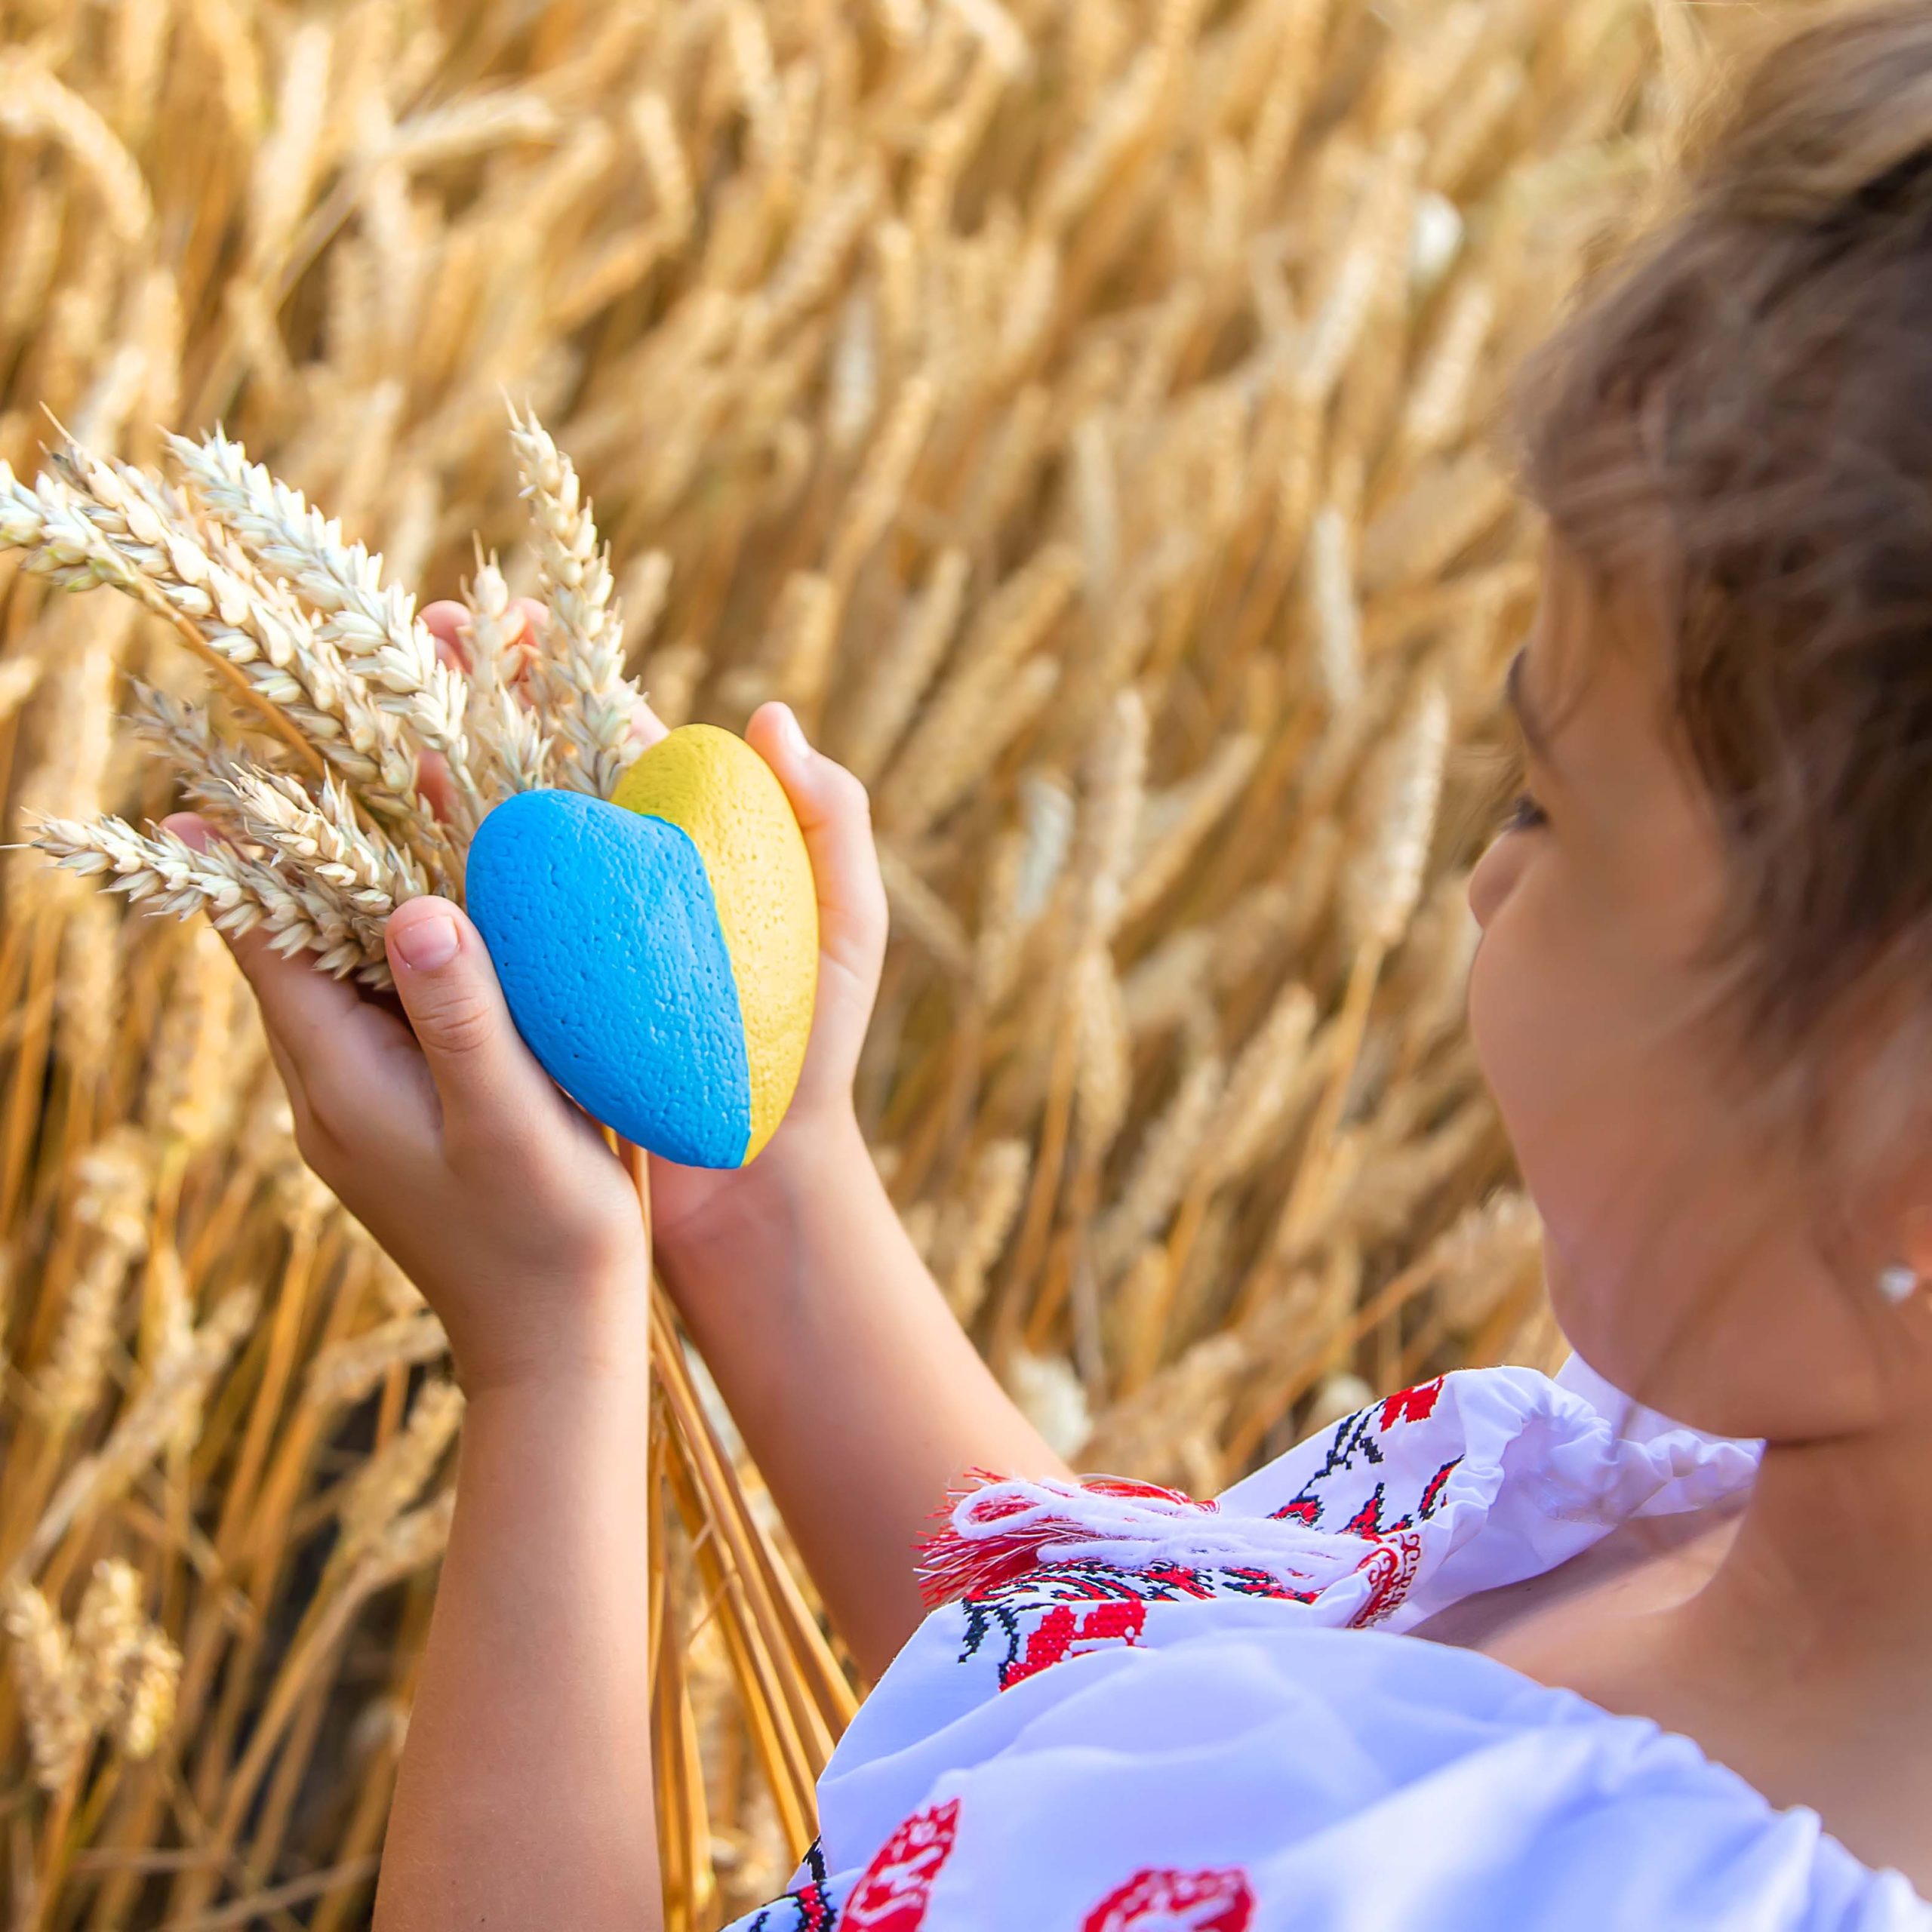 Child in a wheat field. In vyshyvanka, the concept of the Independence Day of Ukraine. Selective focus. Kid.